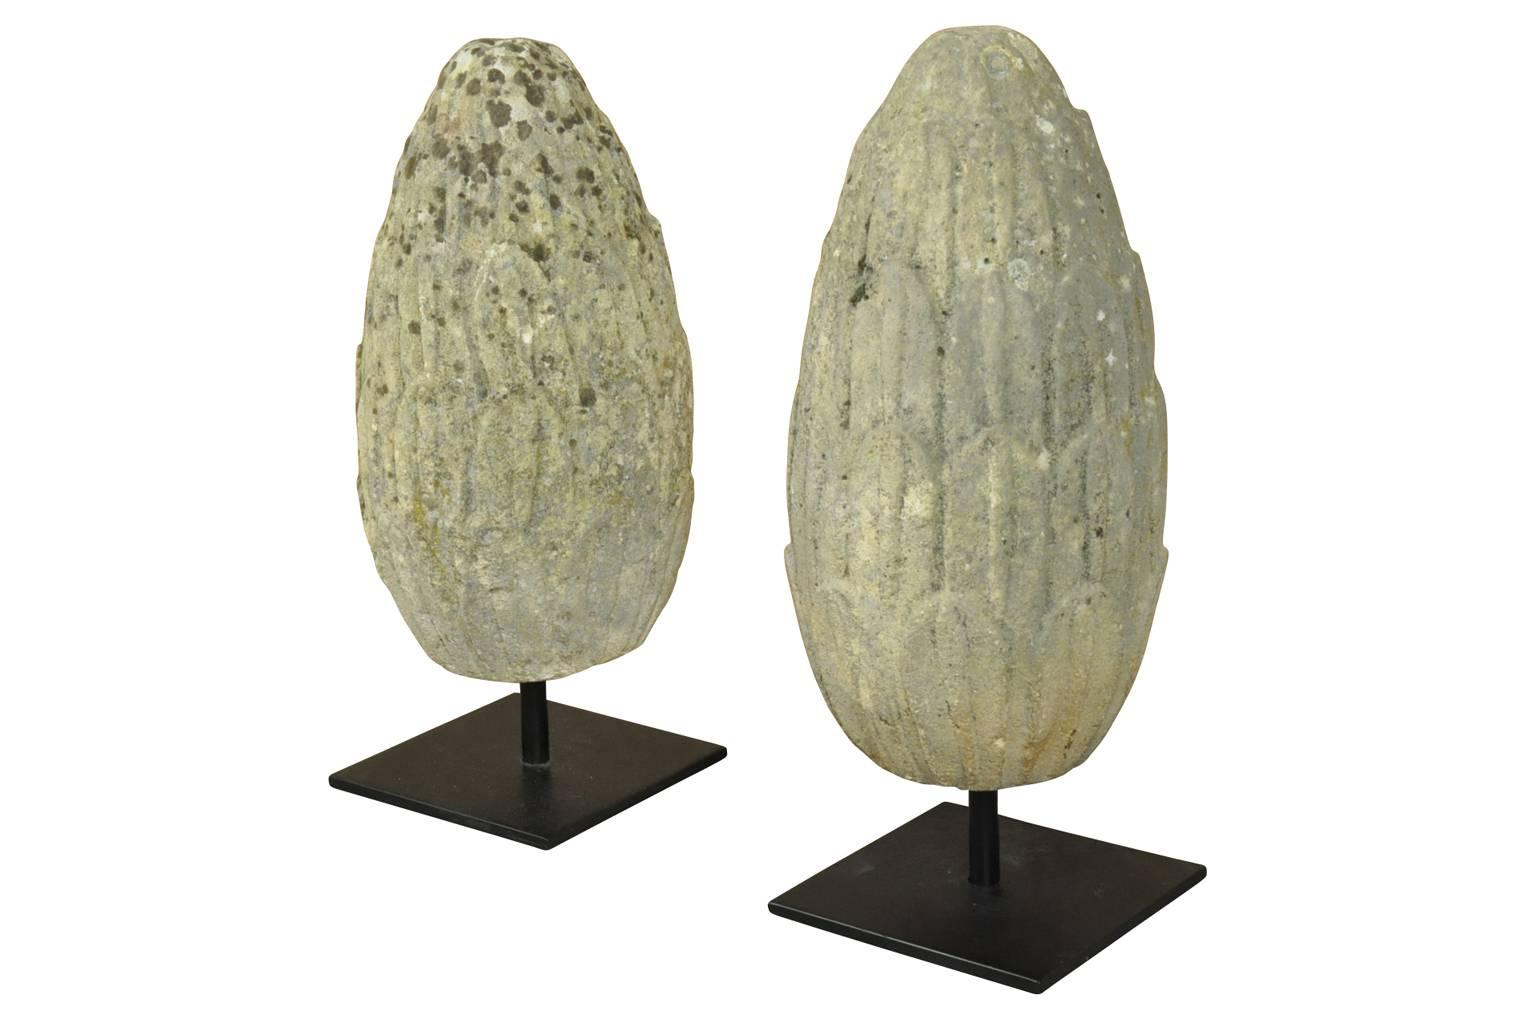 A sensational pair of mid-18th century carved stone finials, pineapples from France. These wonderful architectural elements are presented on iron stands. Terrific accent pieces for a mantel, table top or converted into lamps.